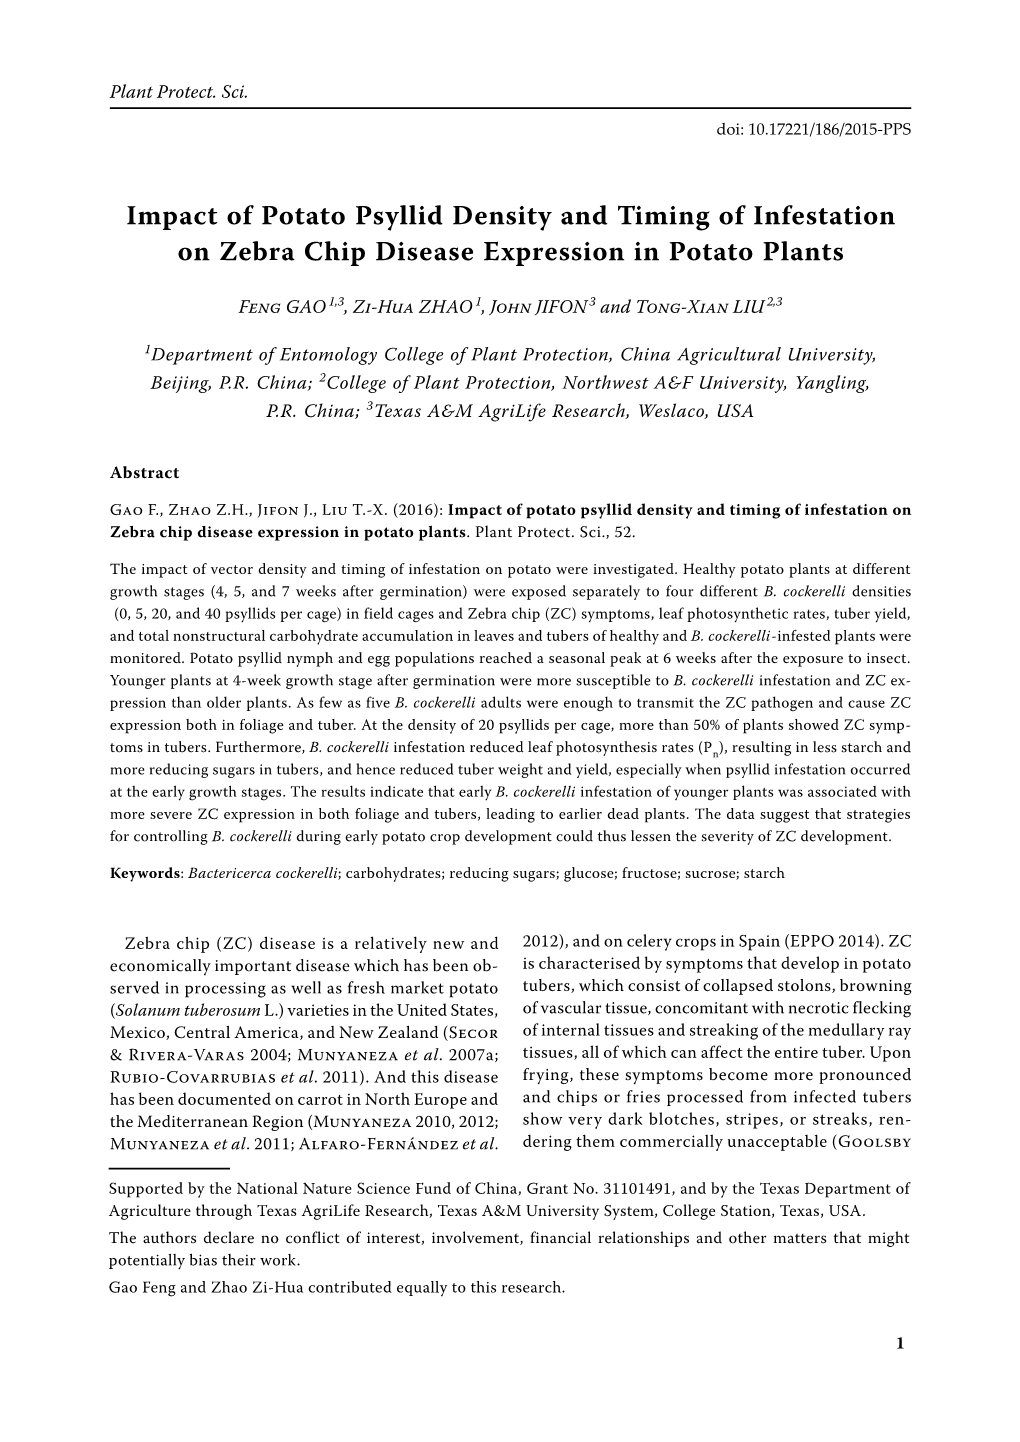 Impact of Potato Psyllid Density and Timing of Infestation on Zebra Chip Disease Expression in Potato Plants